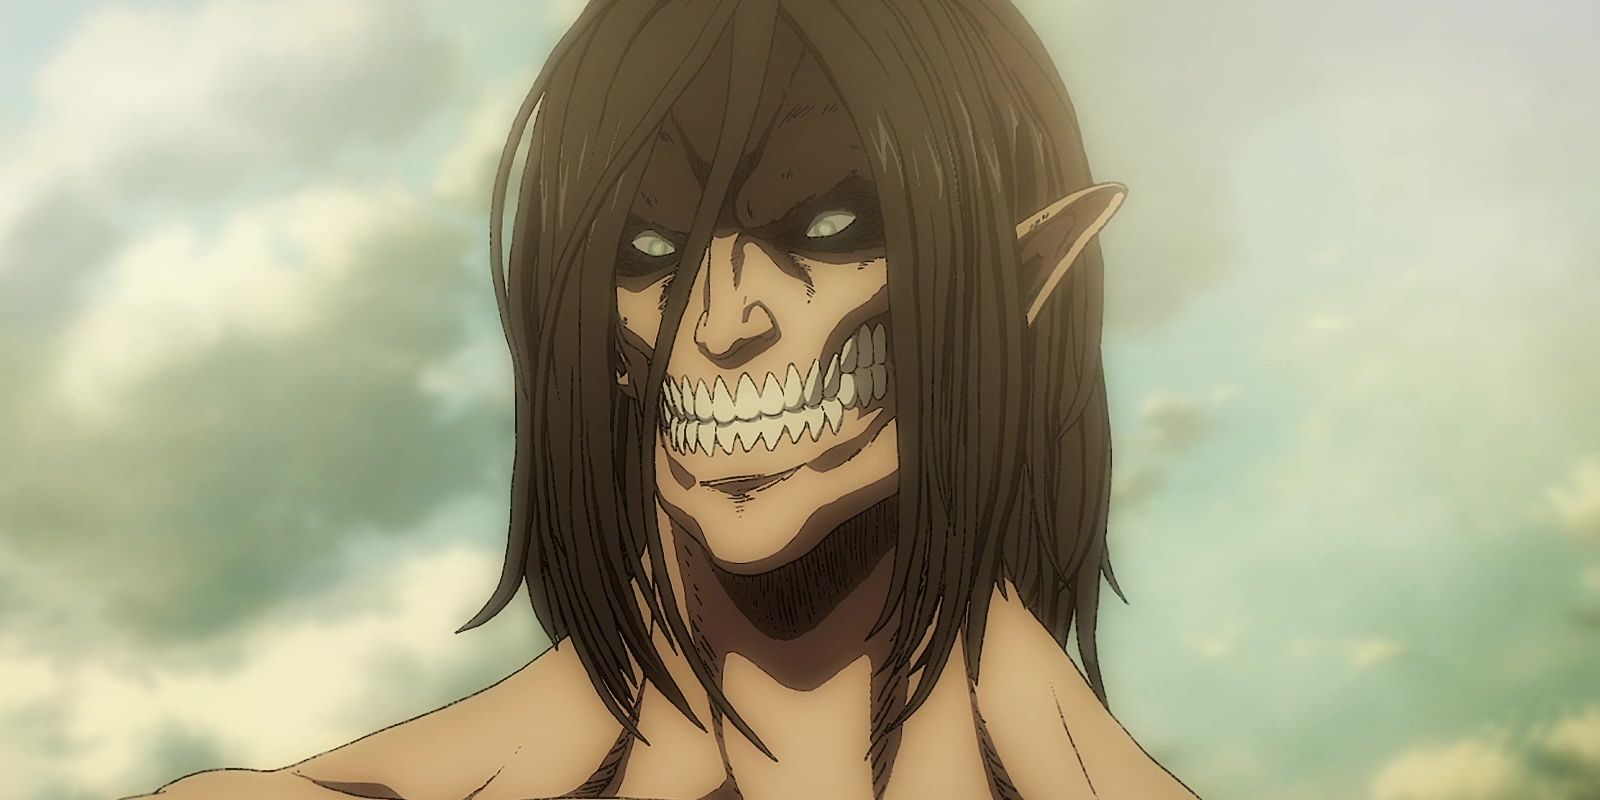 Eren Yeager in his Titan form in Attack on Titan: The Final Season.